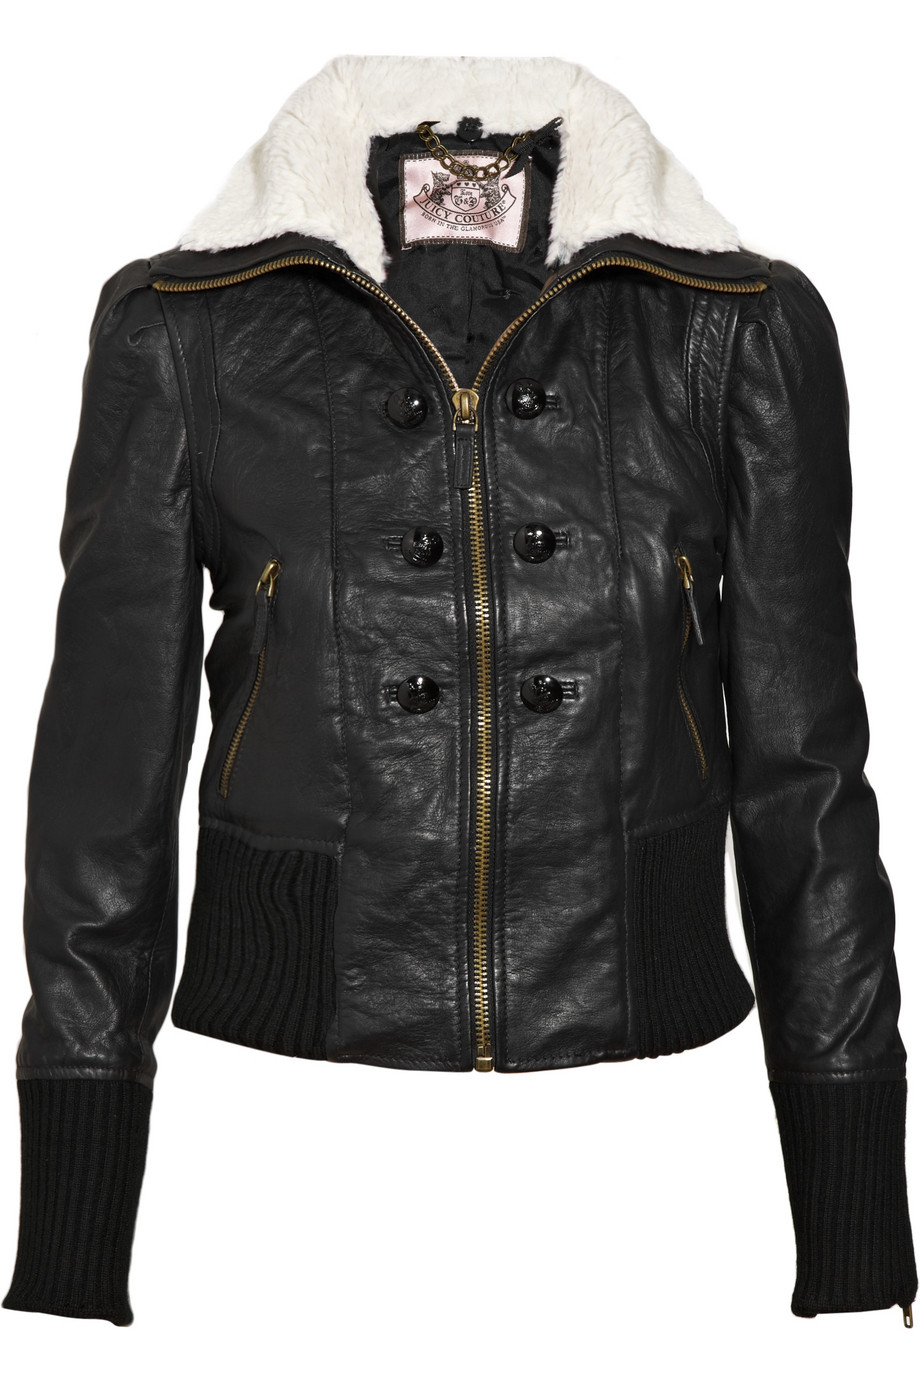 Juicy Couture Shearling-trimmed Leather Bomber Jacket in Black - Lyst